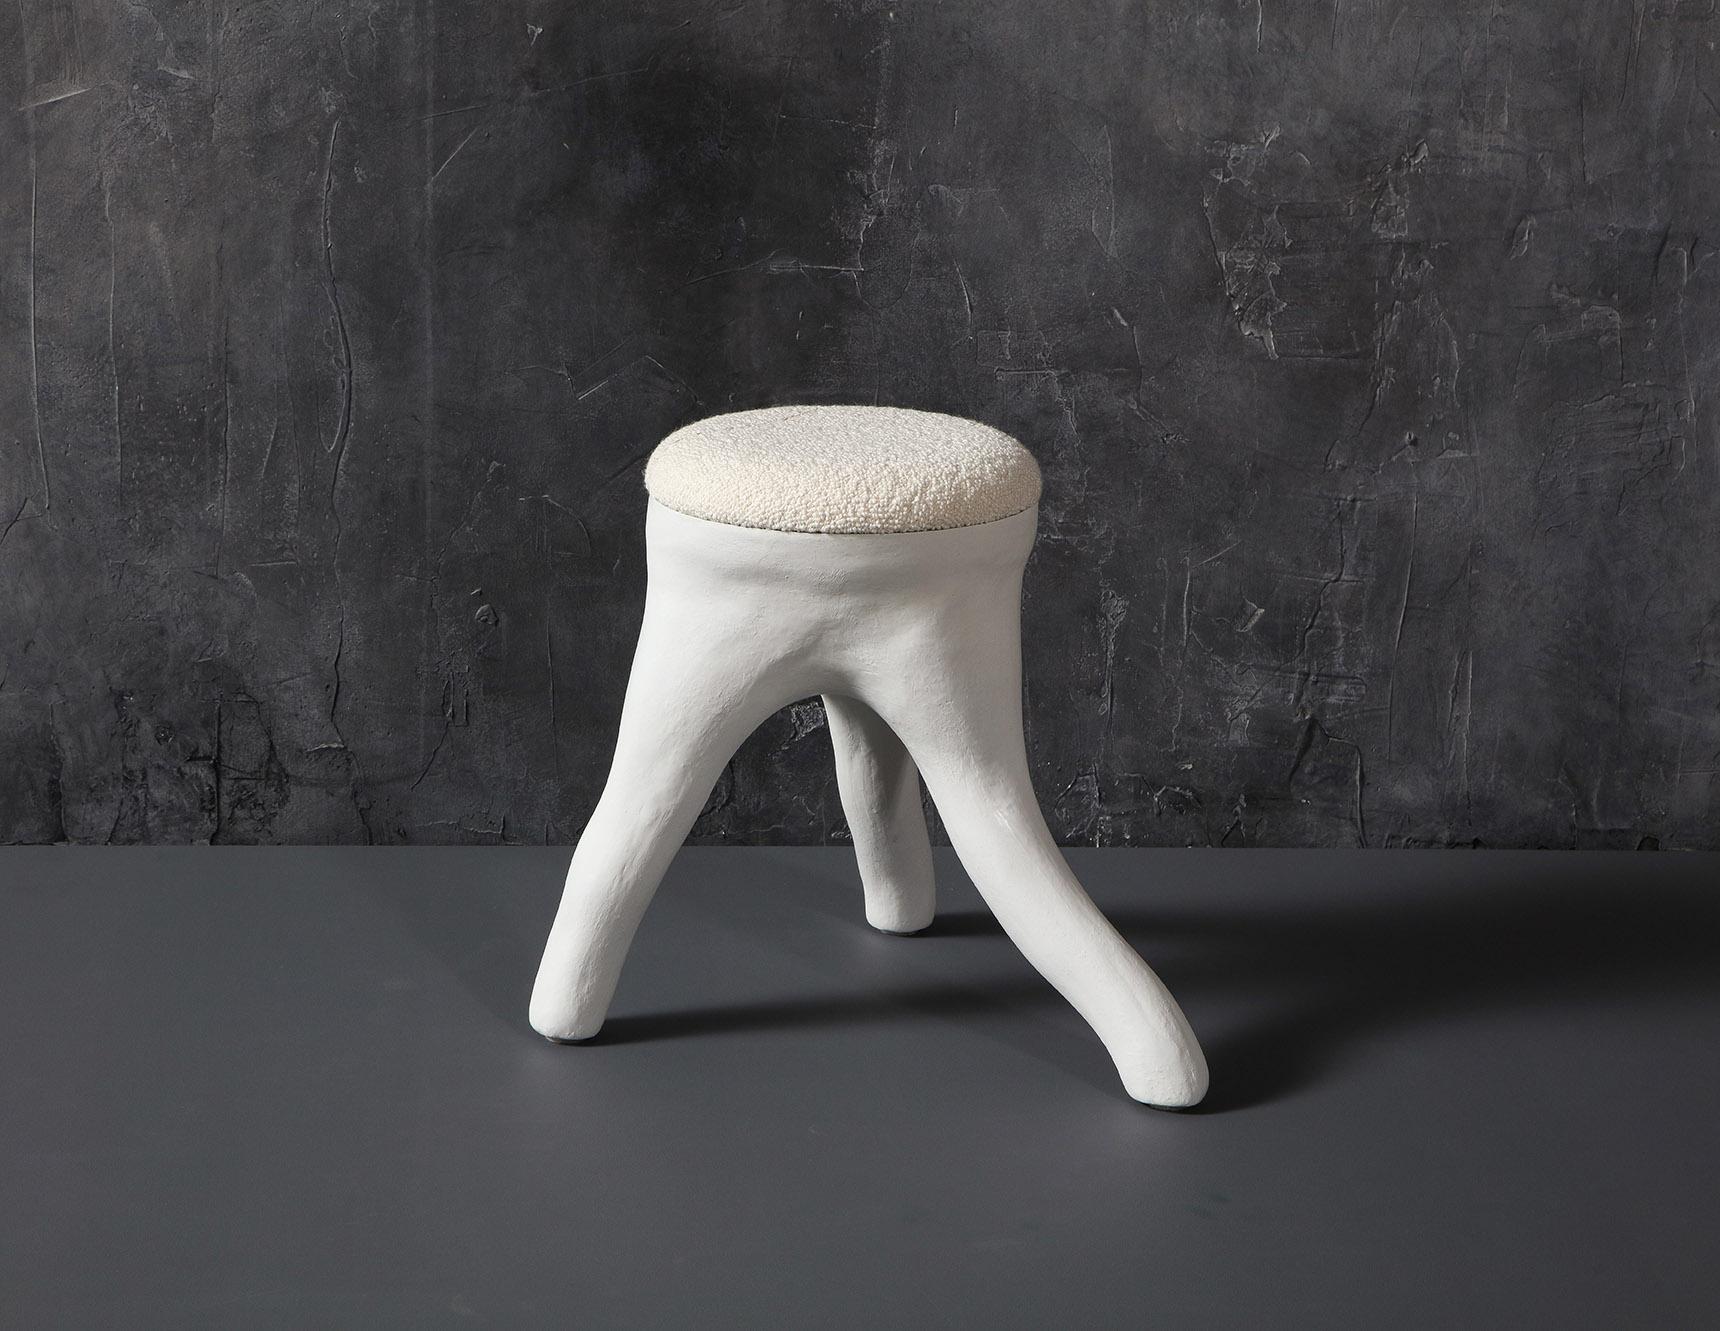 Kavrn Stool, 2021.
Polished concrete, upholstery.
Measures: 18 x 21 x 21 in (top 12 x 12 in).